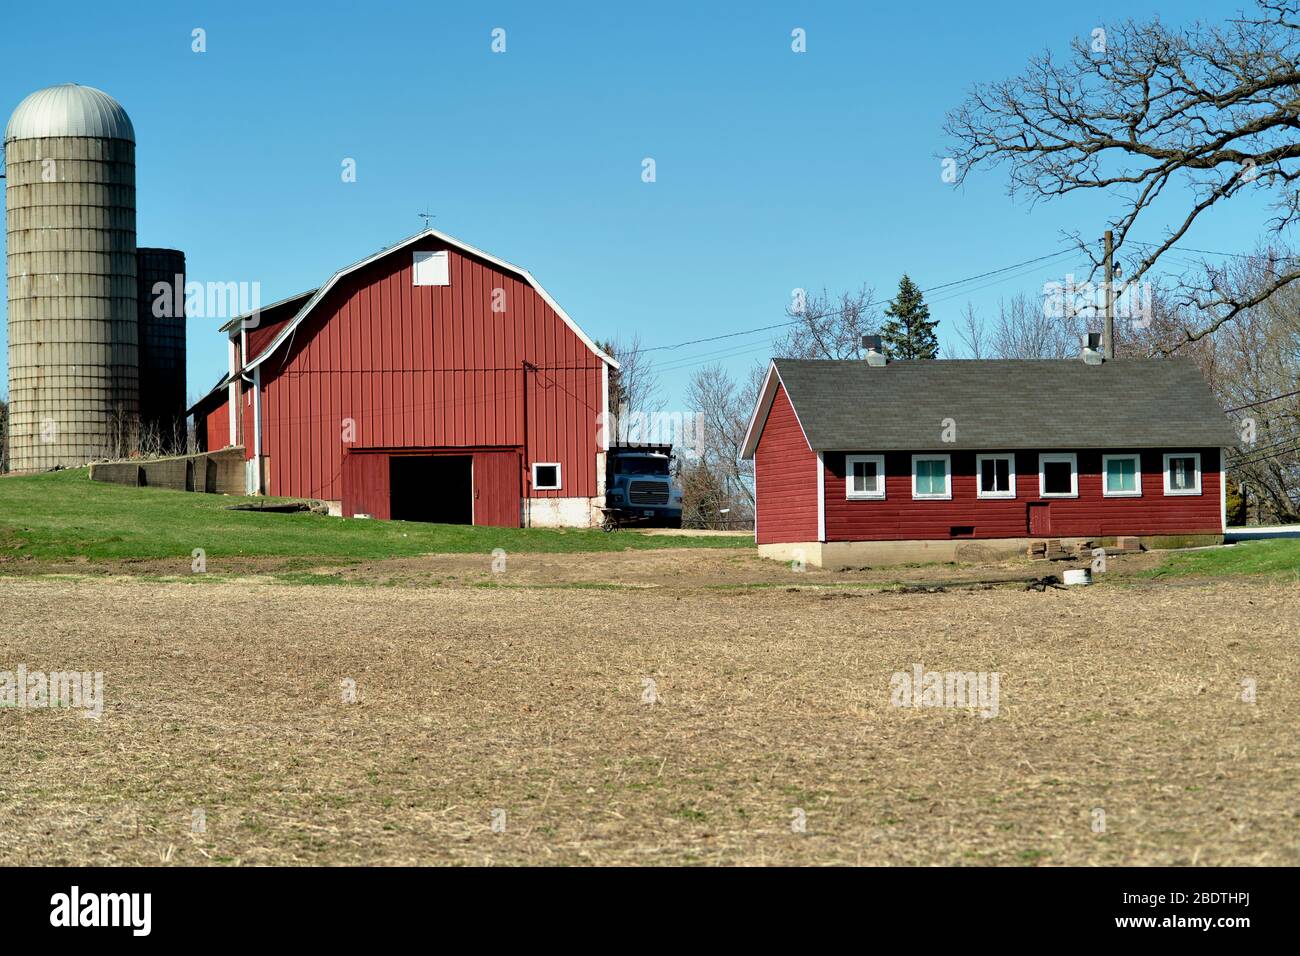 Elgin, Illinois, USA. A red barn sets among structures on a small farm in northeastern Illinois. Stock Photo